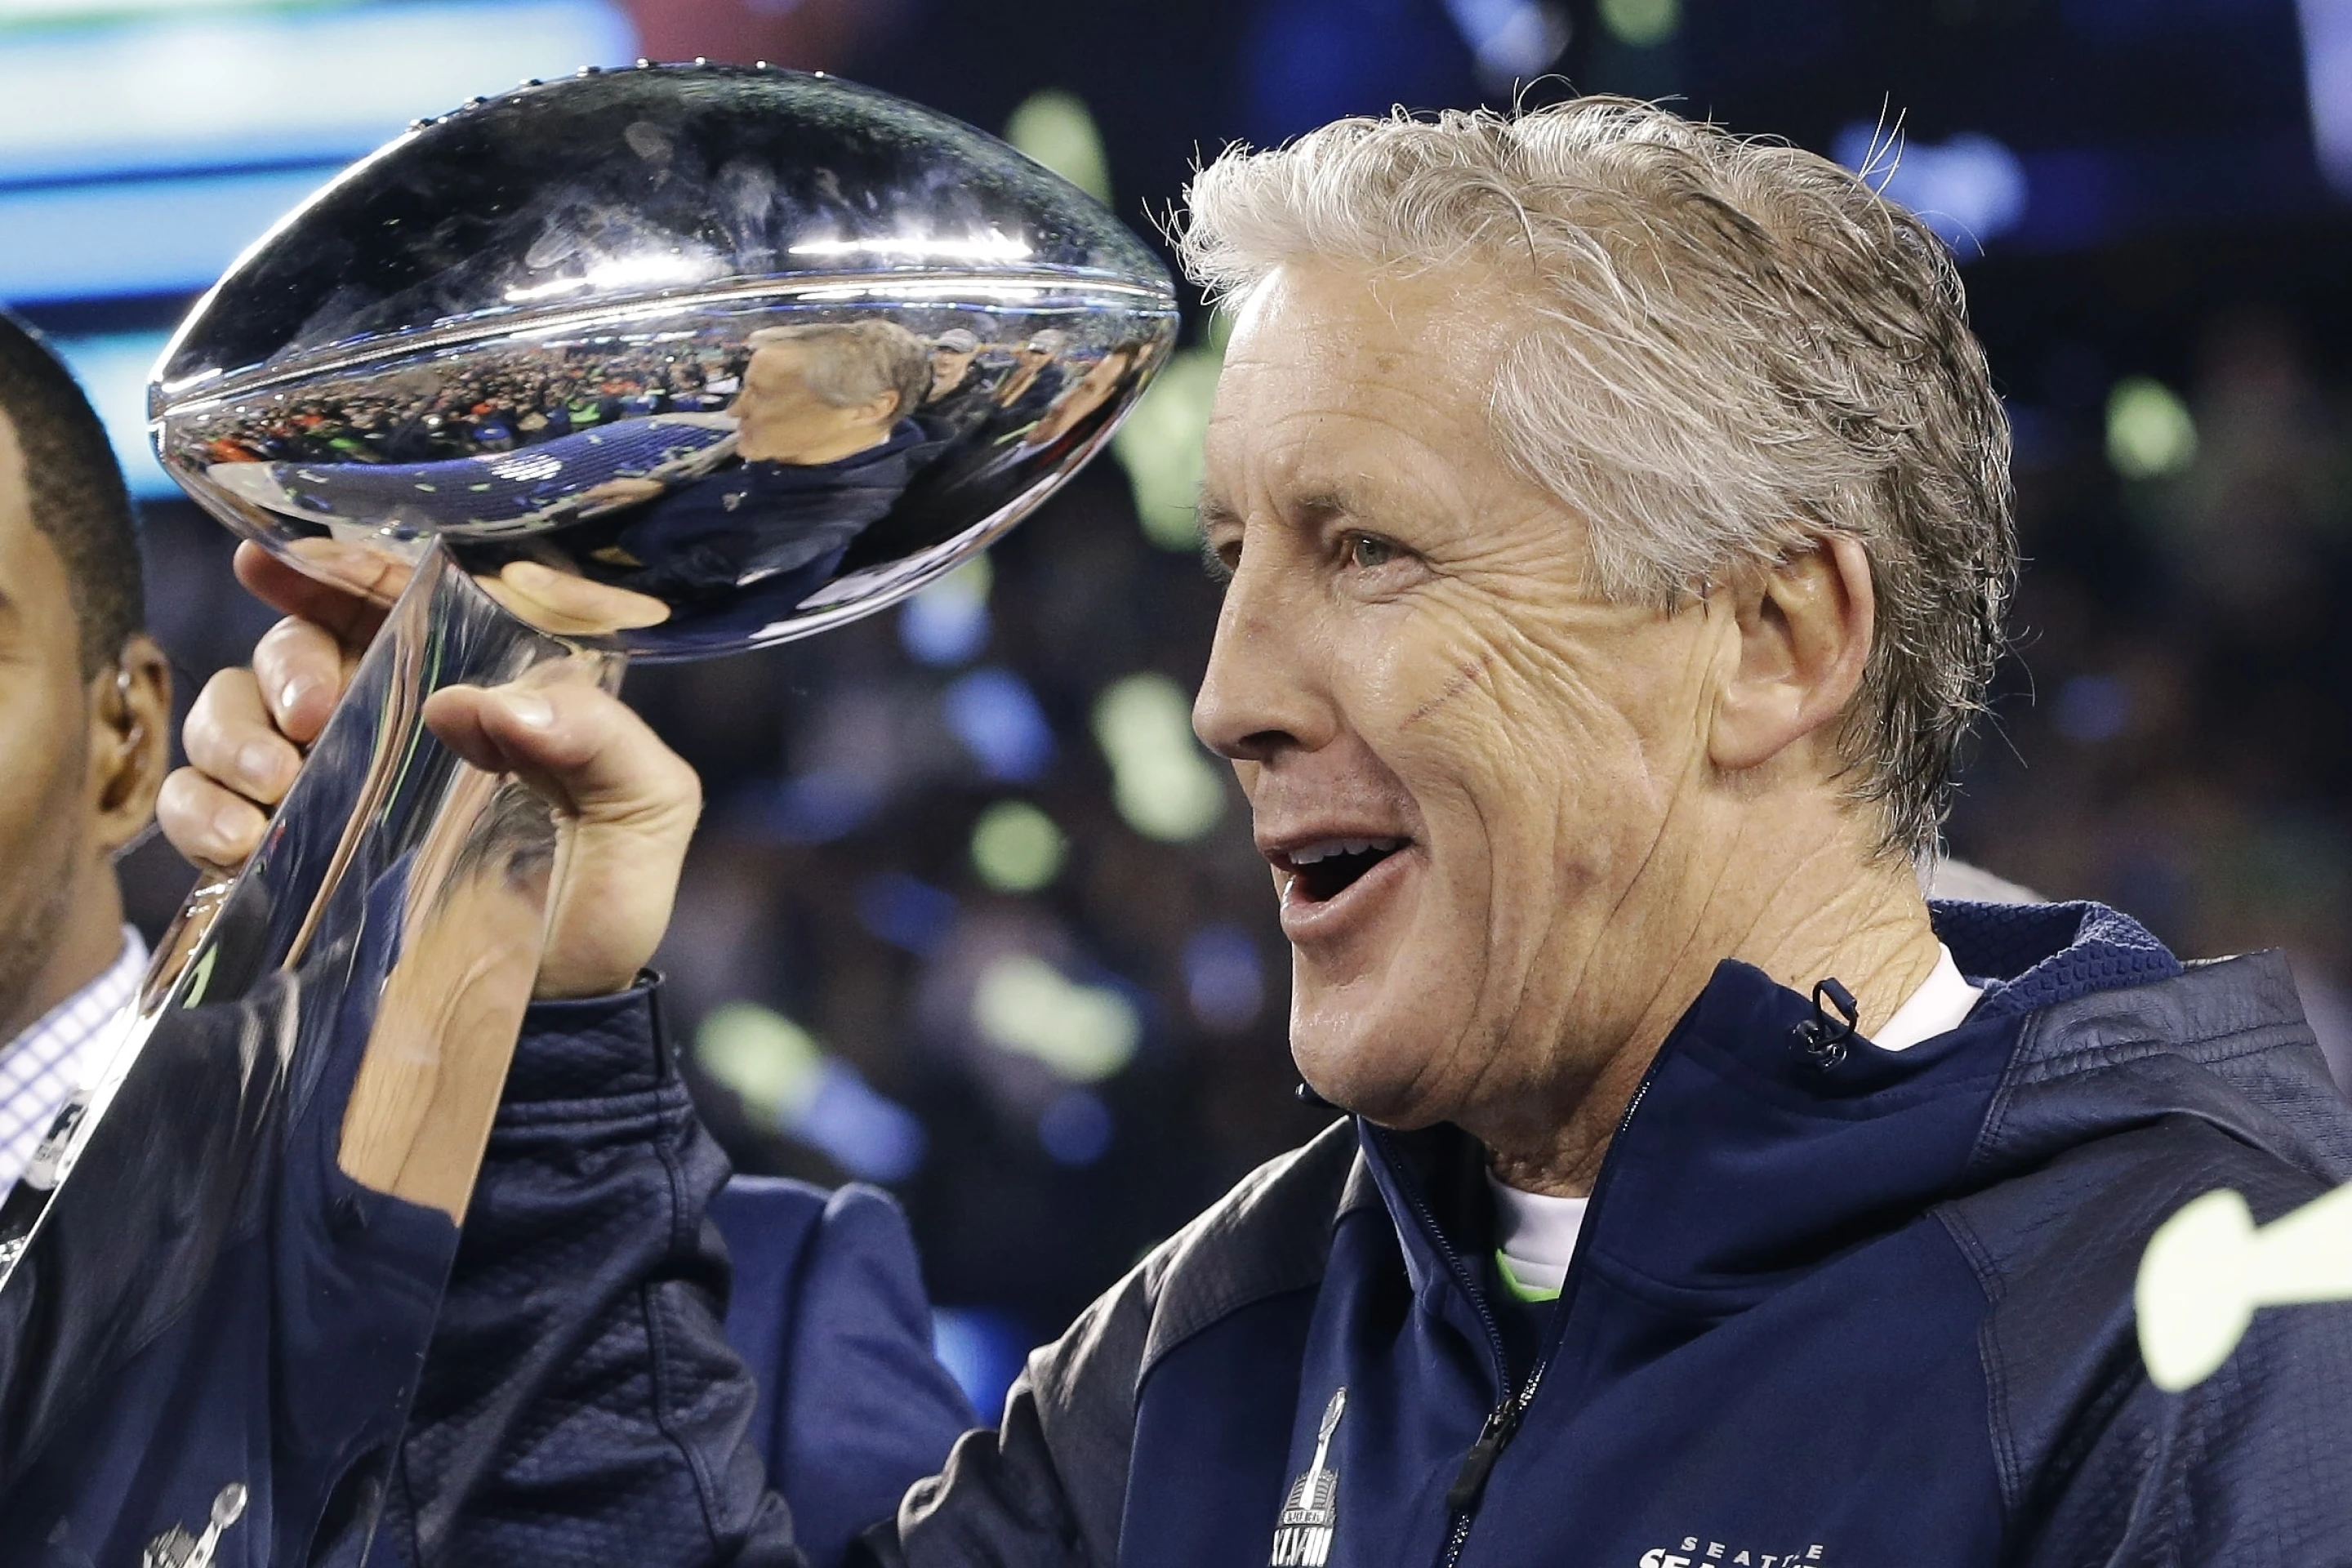 Pete Carroll, head coach of the Seattle Seahawks, celebrates with the Vince Lombardi Trophy after the 43-8 win over the Denver Broncos in Super Bowl XLVIII at the MetLife Stadium in East Rutherford, New Jersey, February 2, 2014. /AP